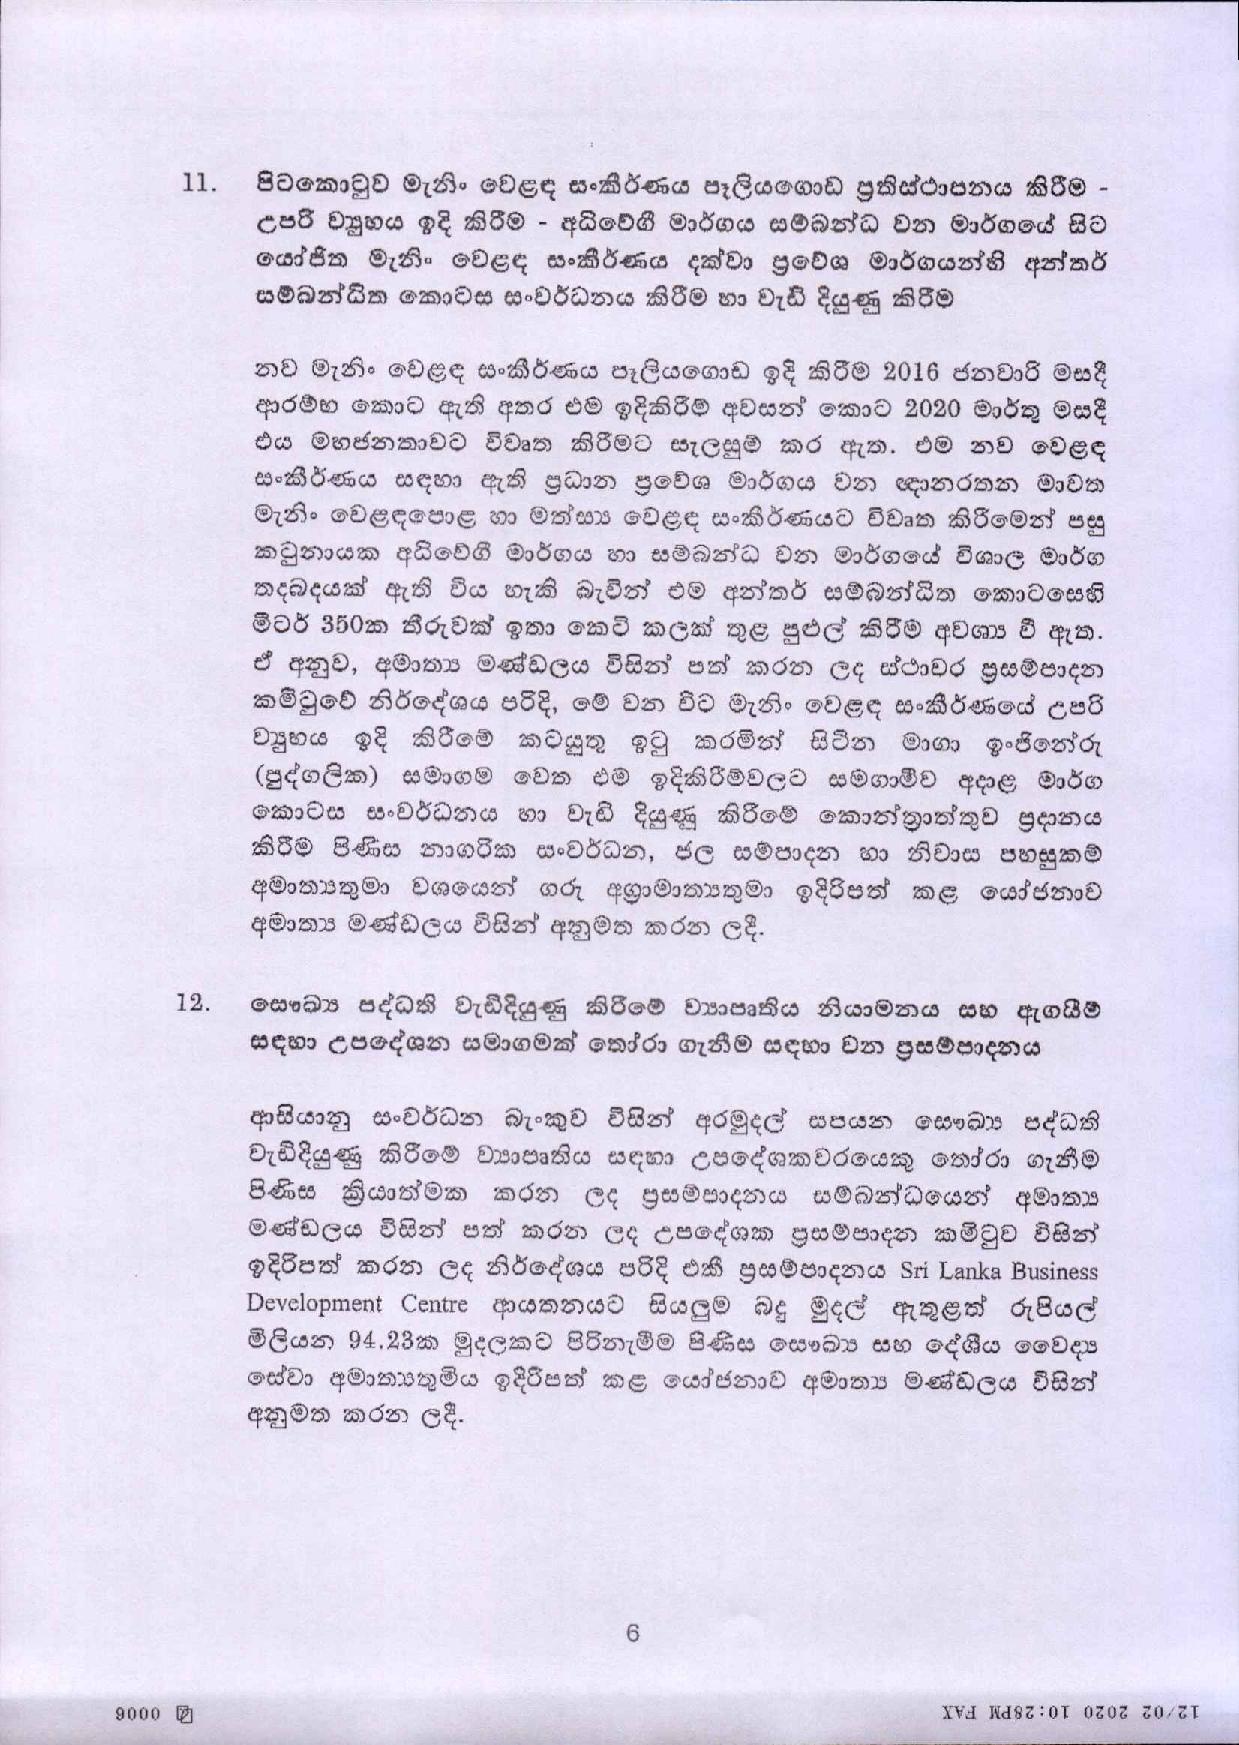 Cabinet Decision on 12.02.2020 page 006